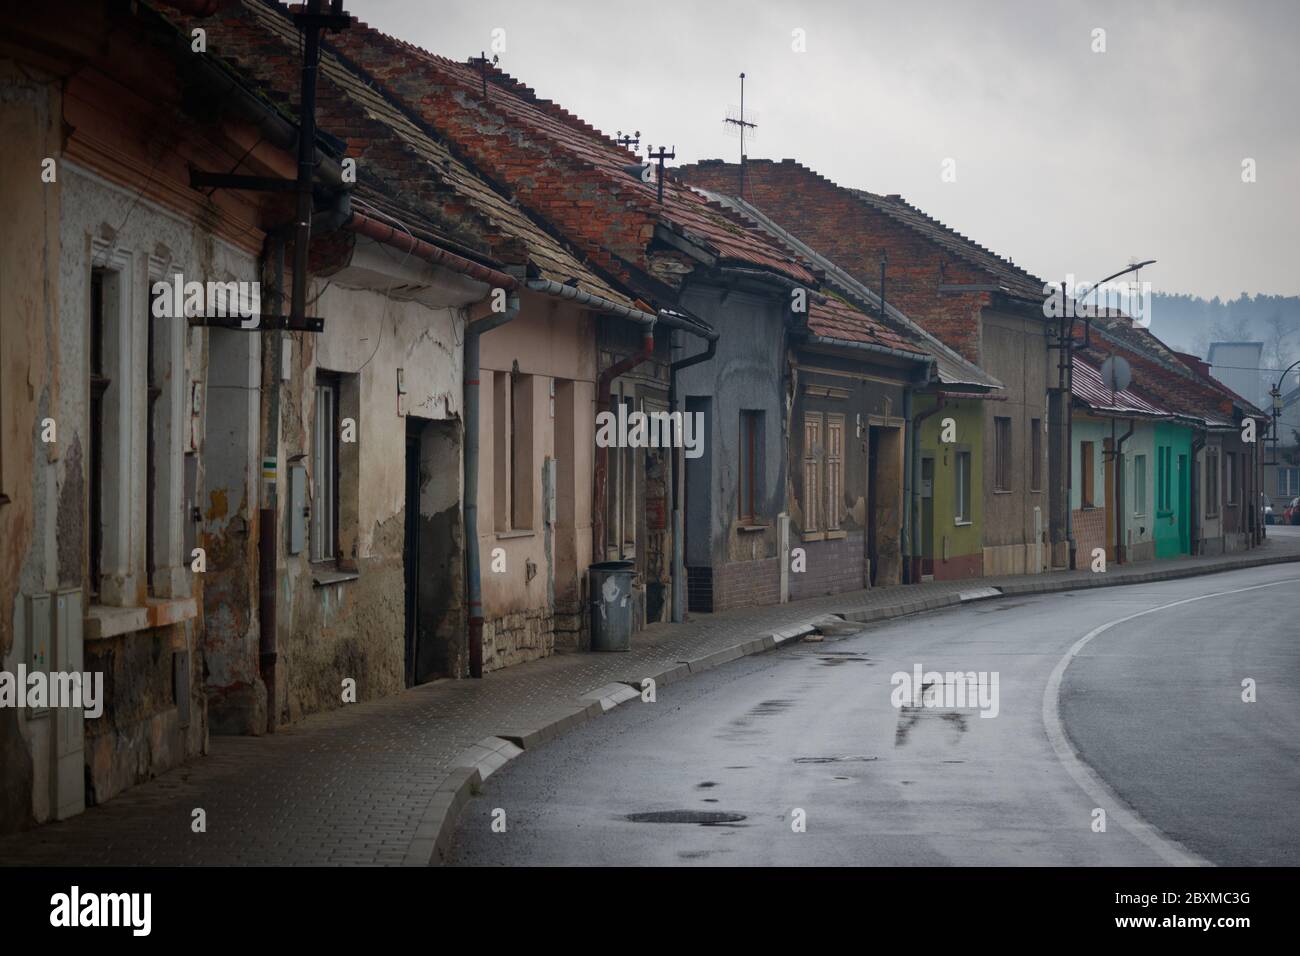 glimpse of a small village within Slovakia Stock Photo